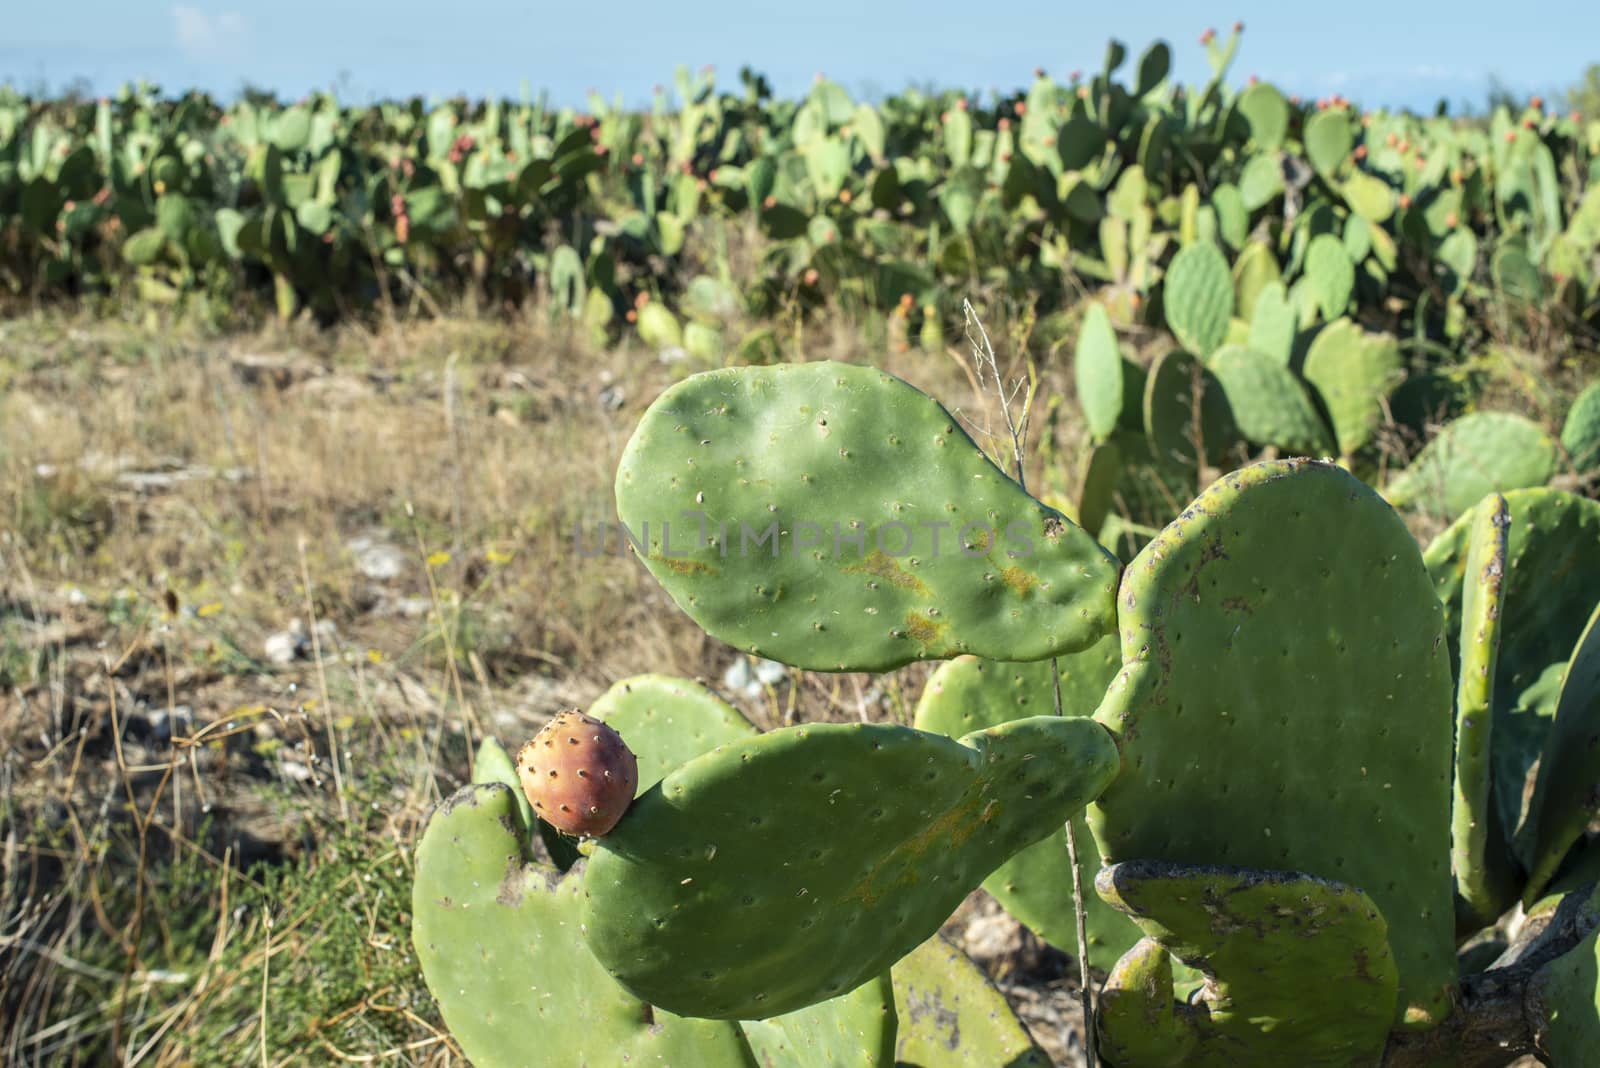 Industrial cactus plantation. Growing cactus. Fruits on cactus. Sunny day.